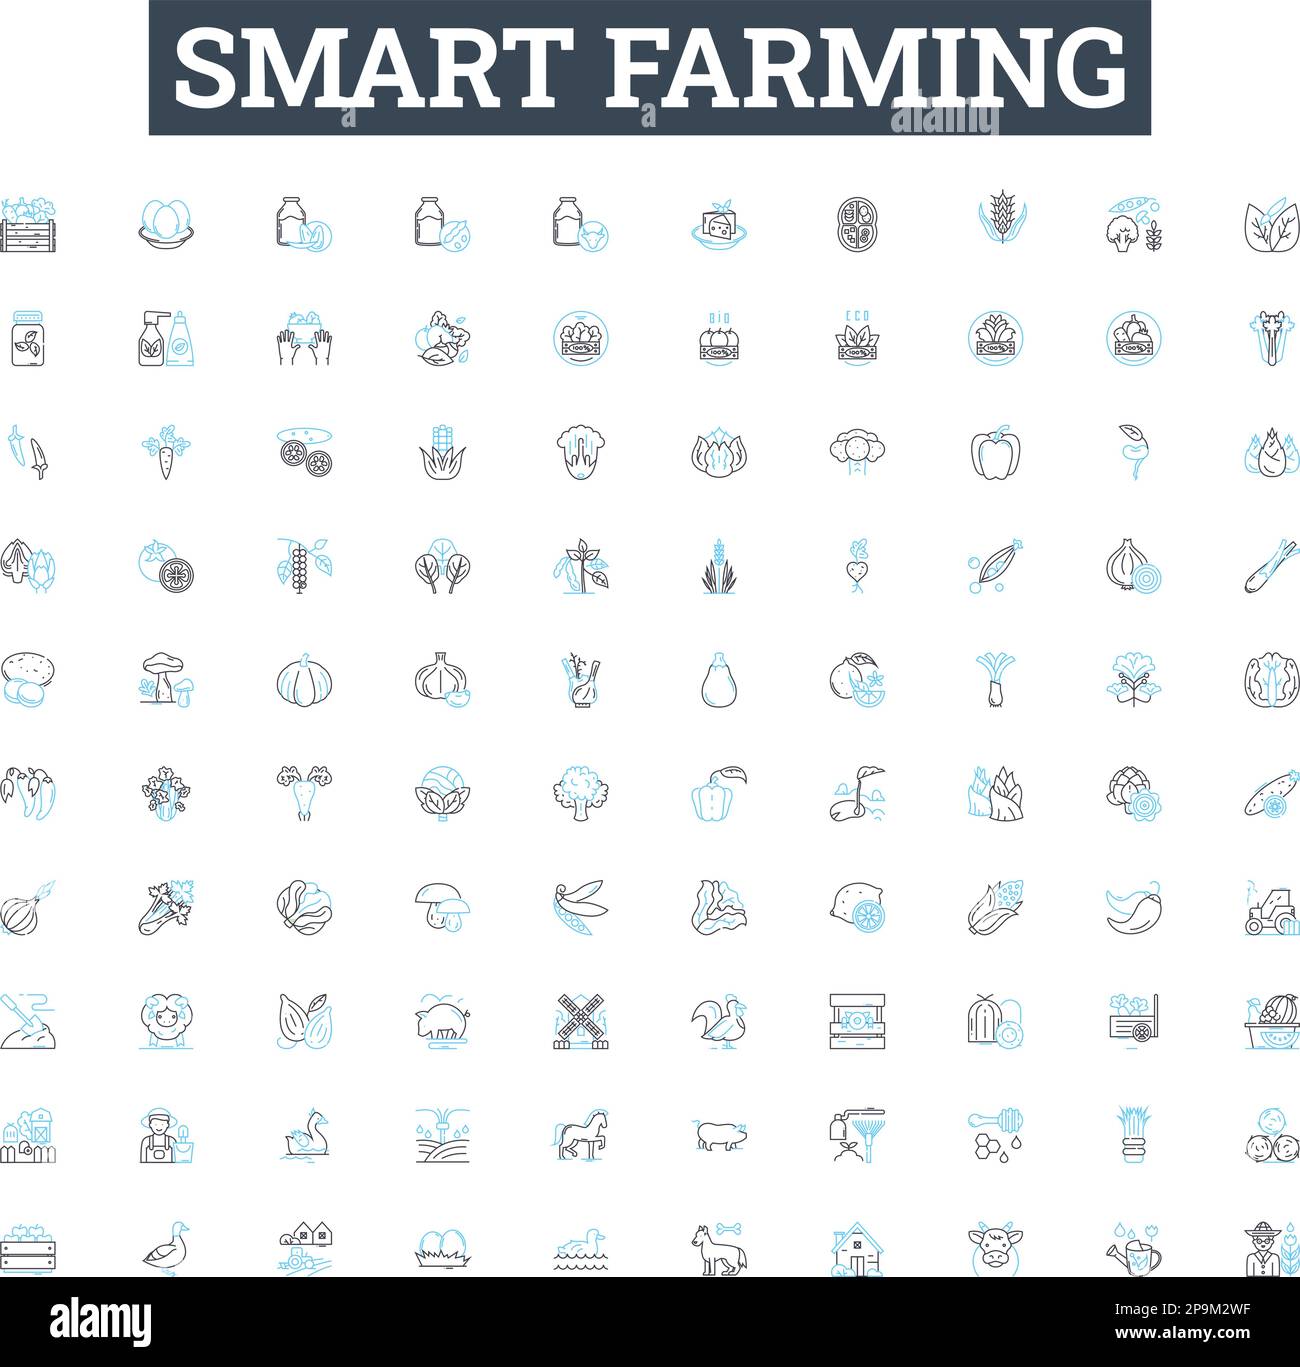 Smart farming vector line icons set. Precision, Agriculture, Technology, Automation, IoT, Remote, Monitoring illustration outline concept symbols and Stock Vector